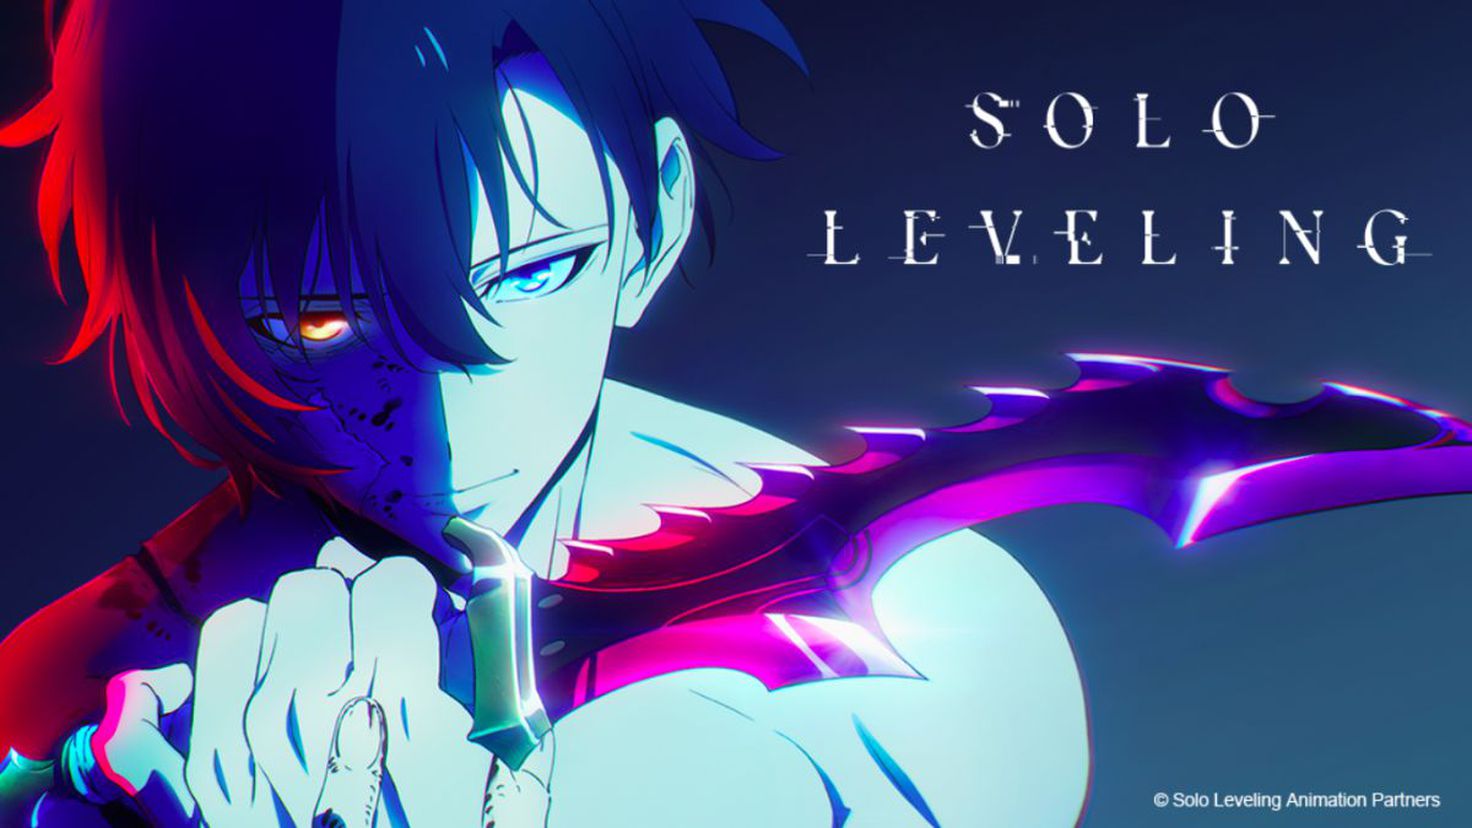 Solo Leveling Anime Reveals Opening Theme by K-pop Group Tomorrow x Together